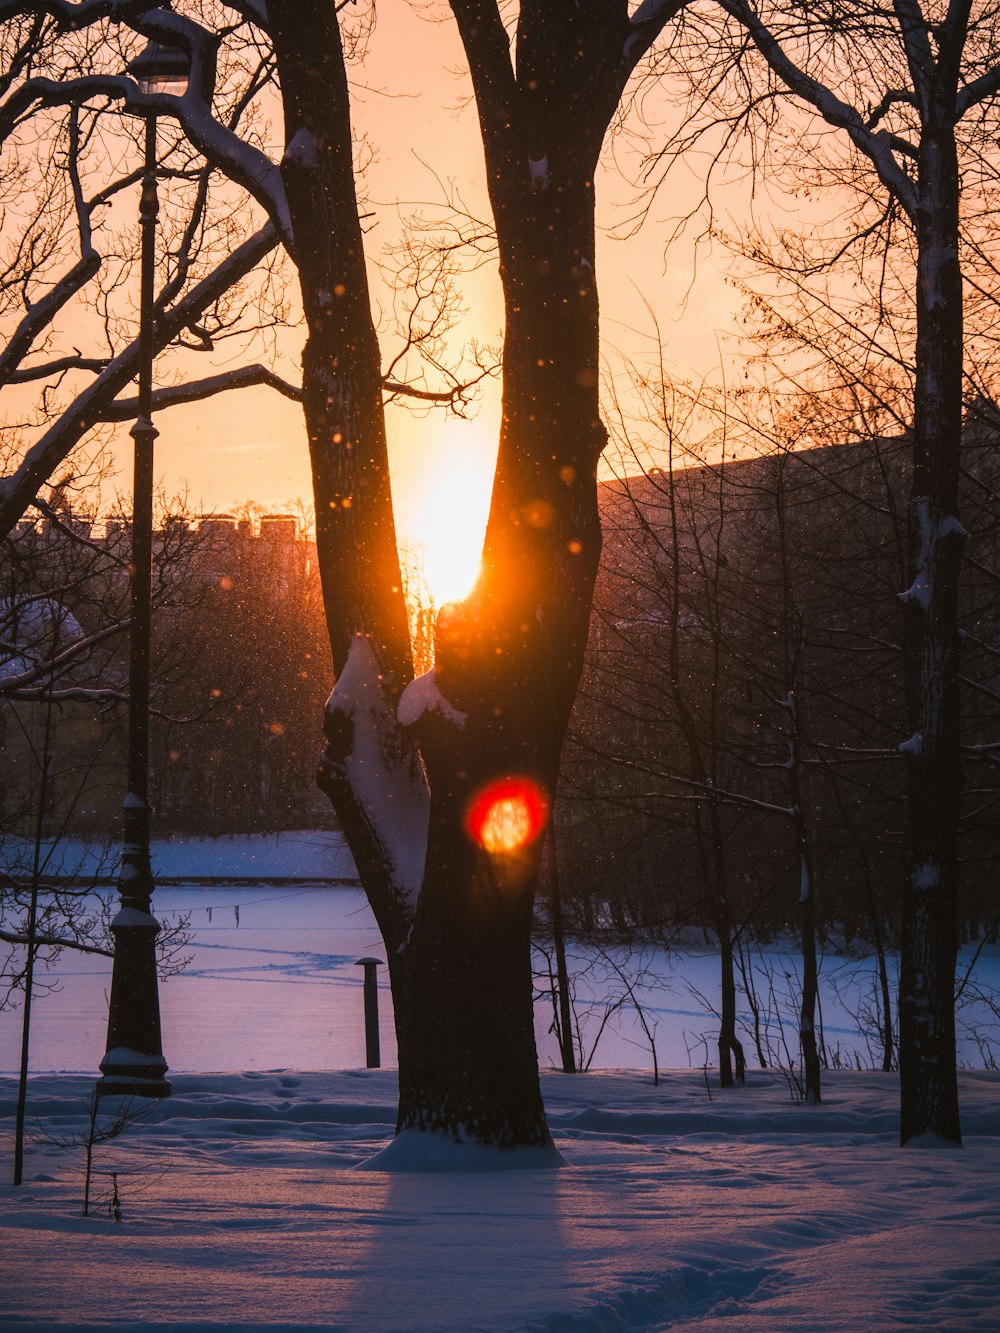 the sun is setting behind a tree in the snow